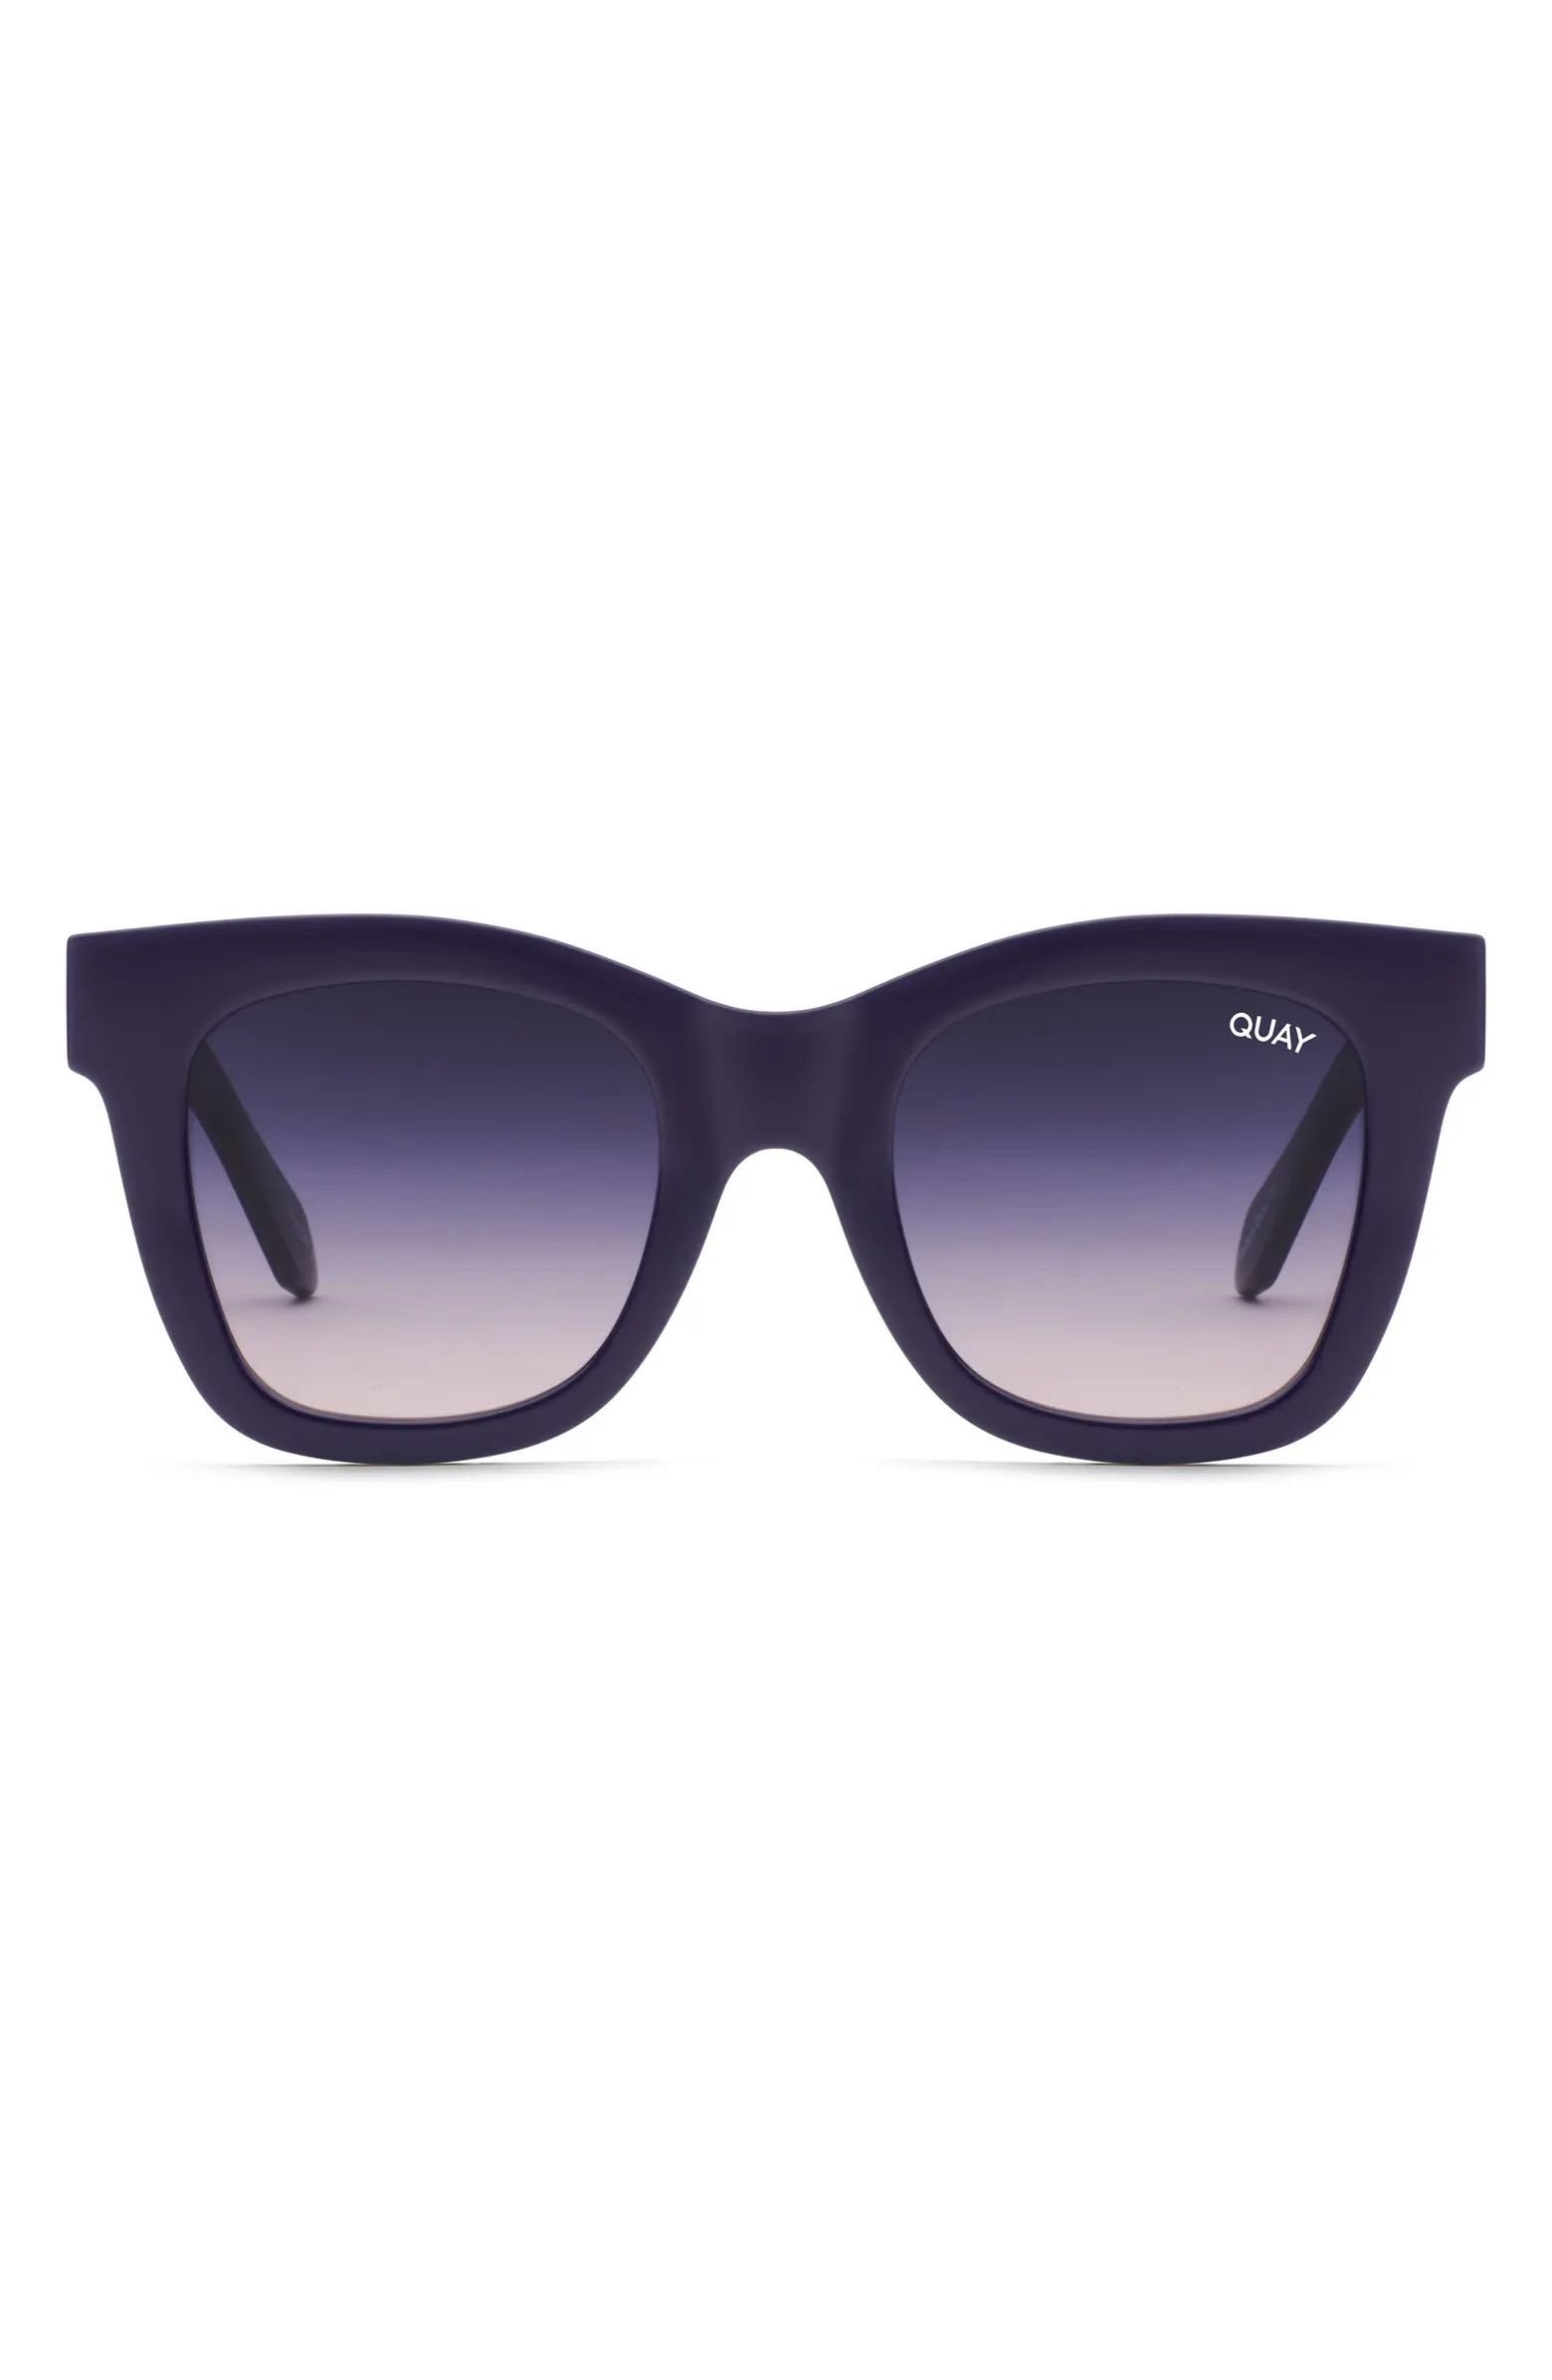 After Hours 50mm Polarized Gradient Square Sunglasses | Nordstrom